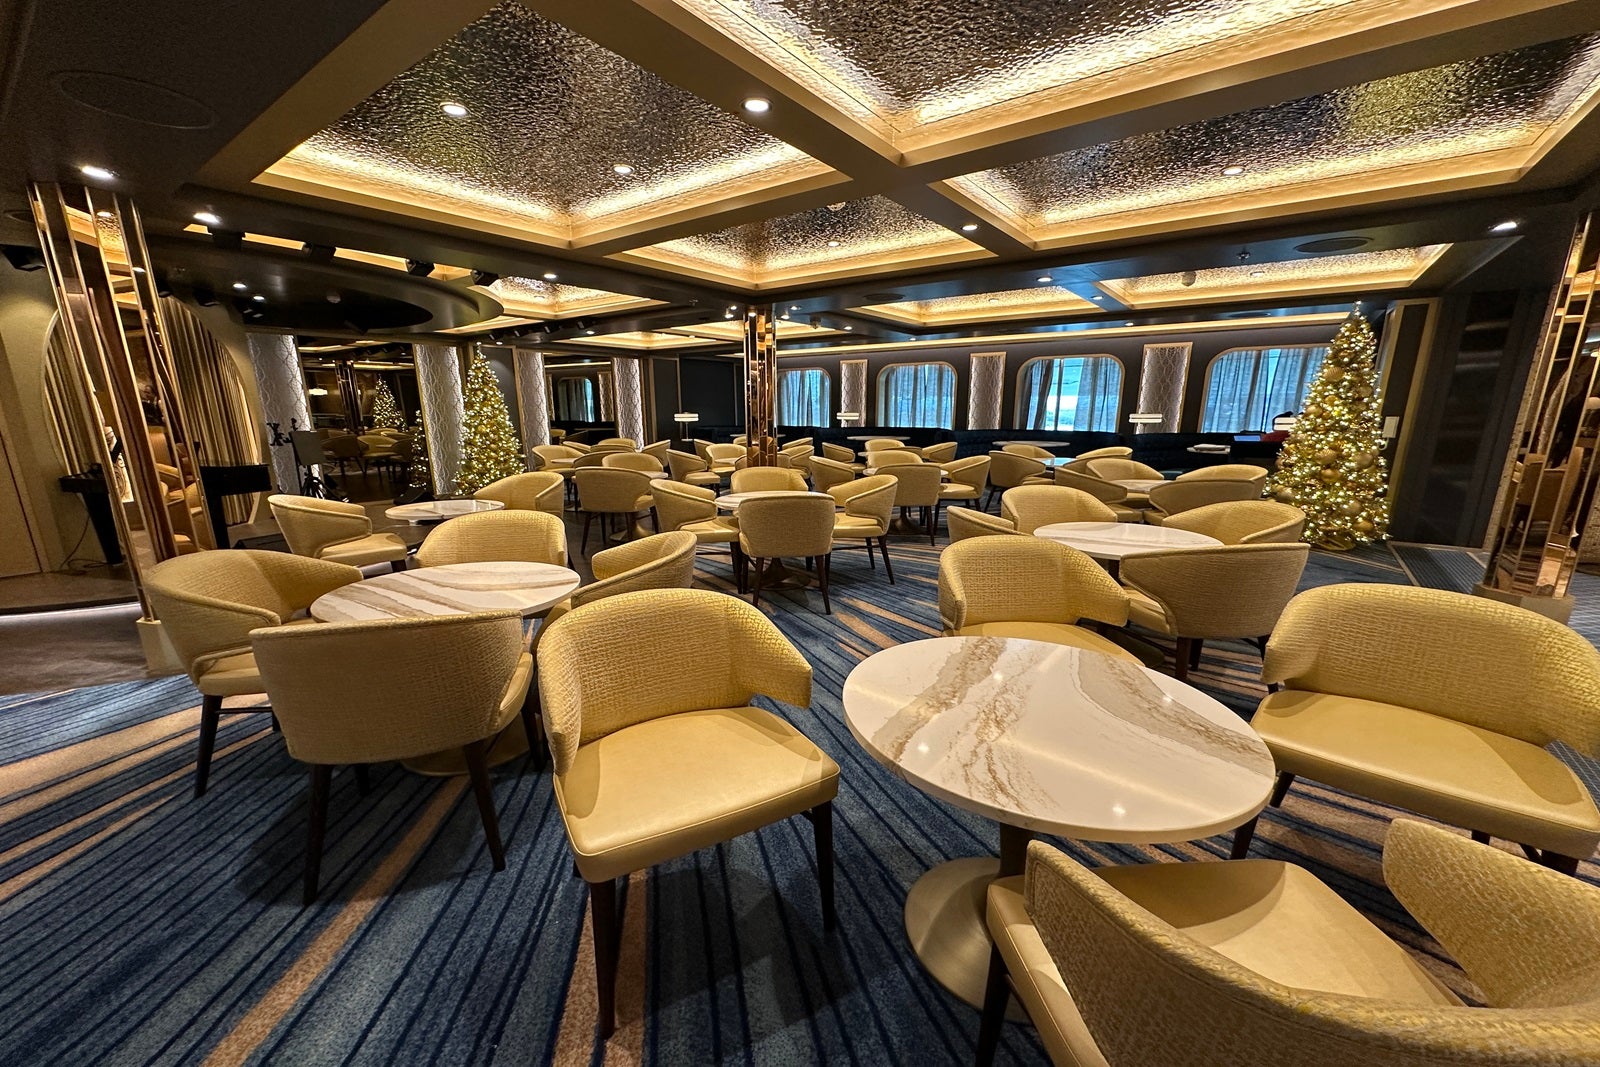 Tables with gold upholstered chairs fill the seating area near a bar on a cruise ship